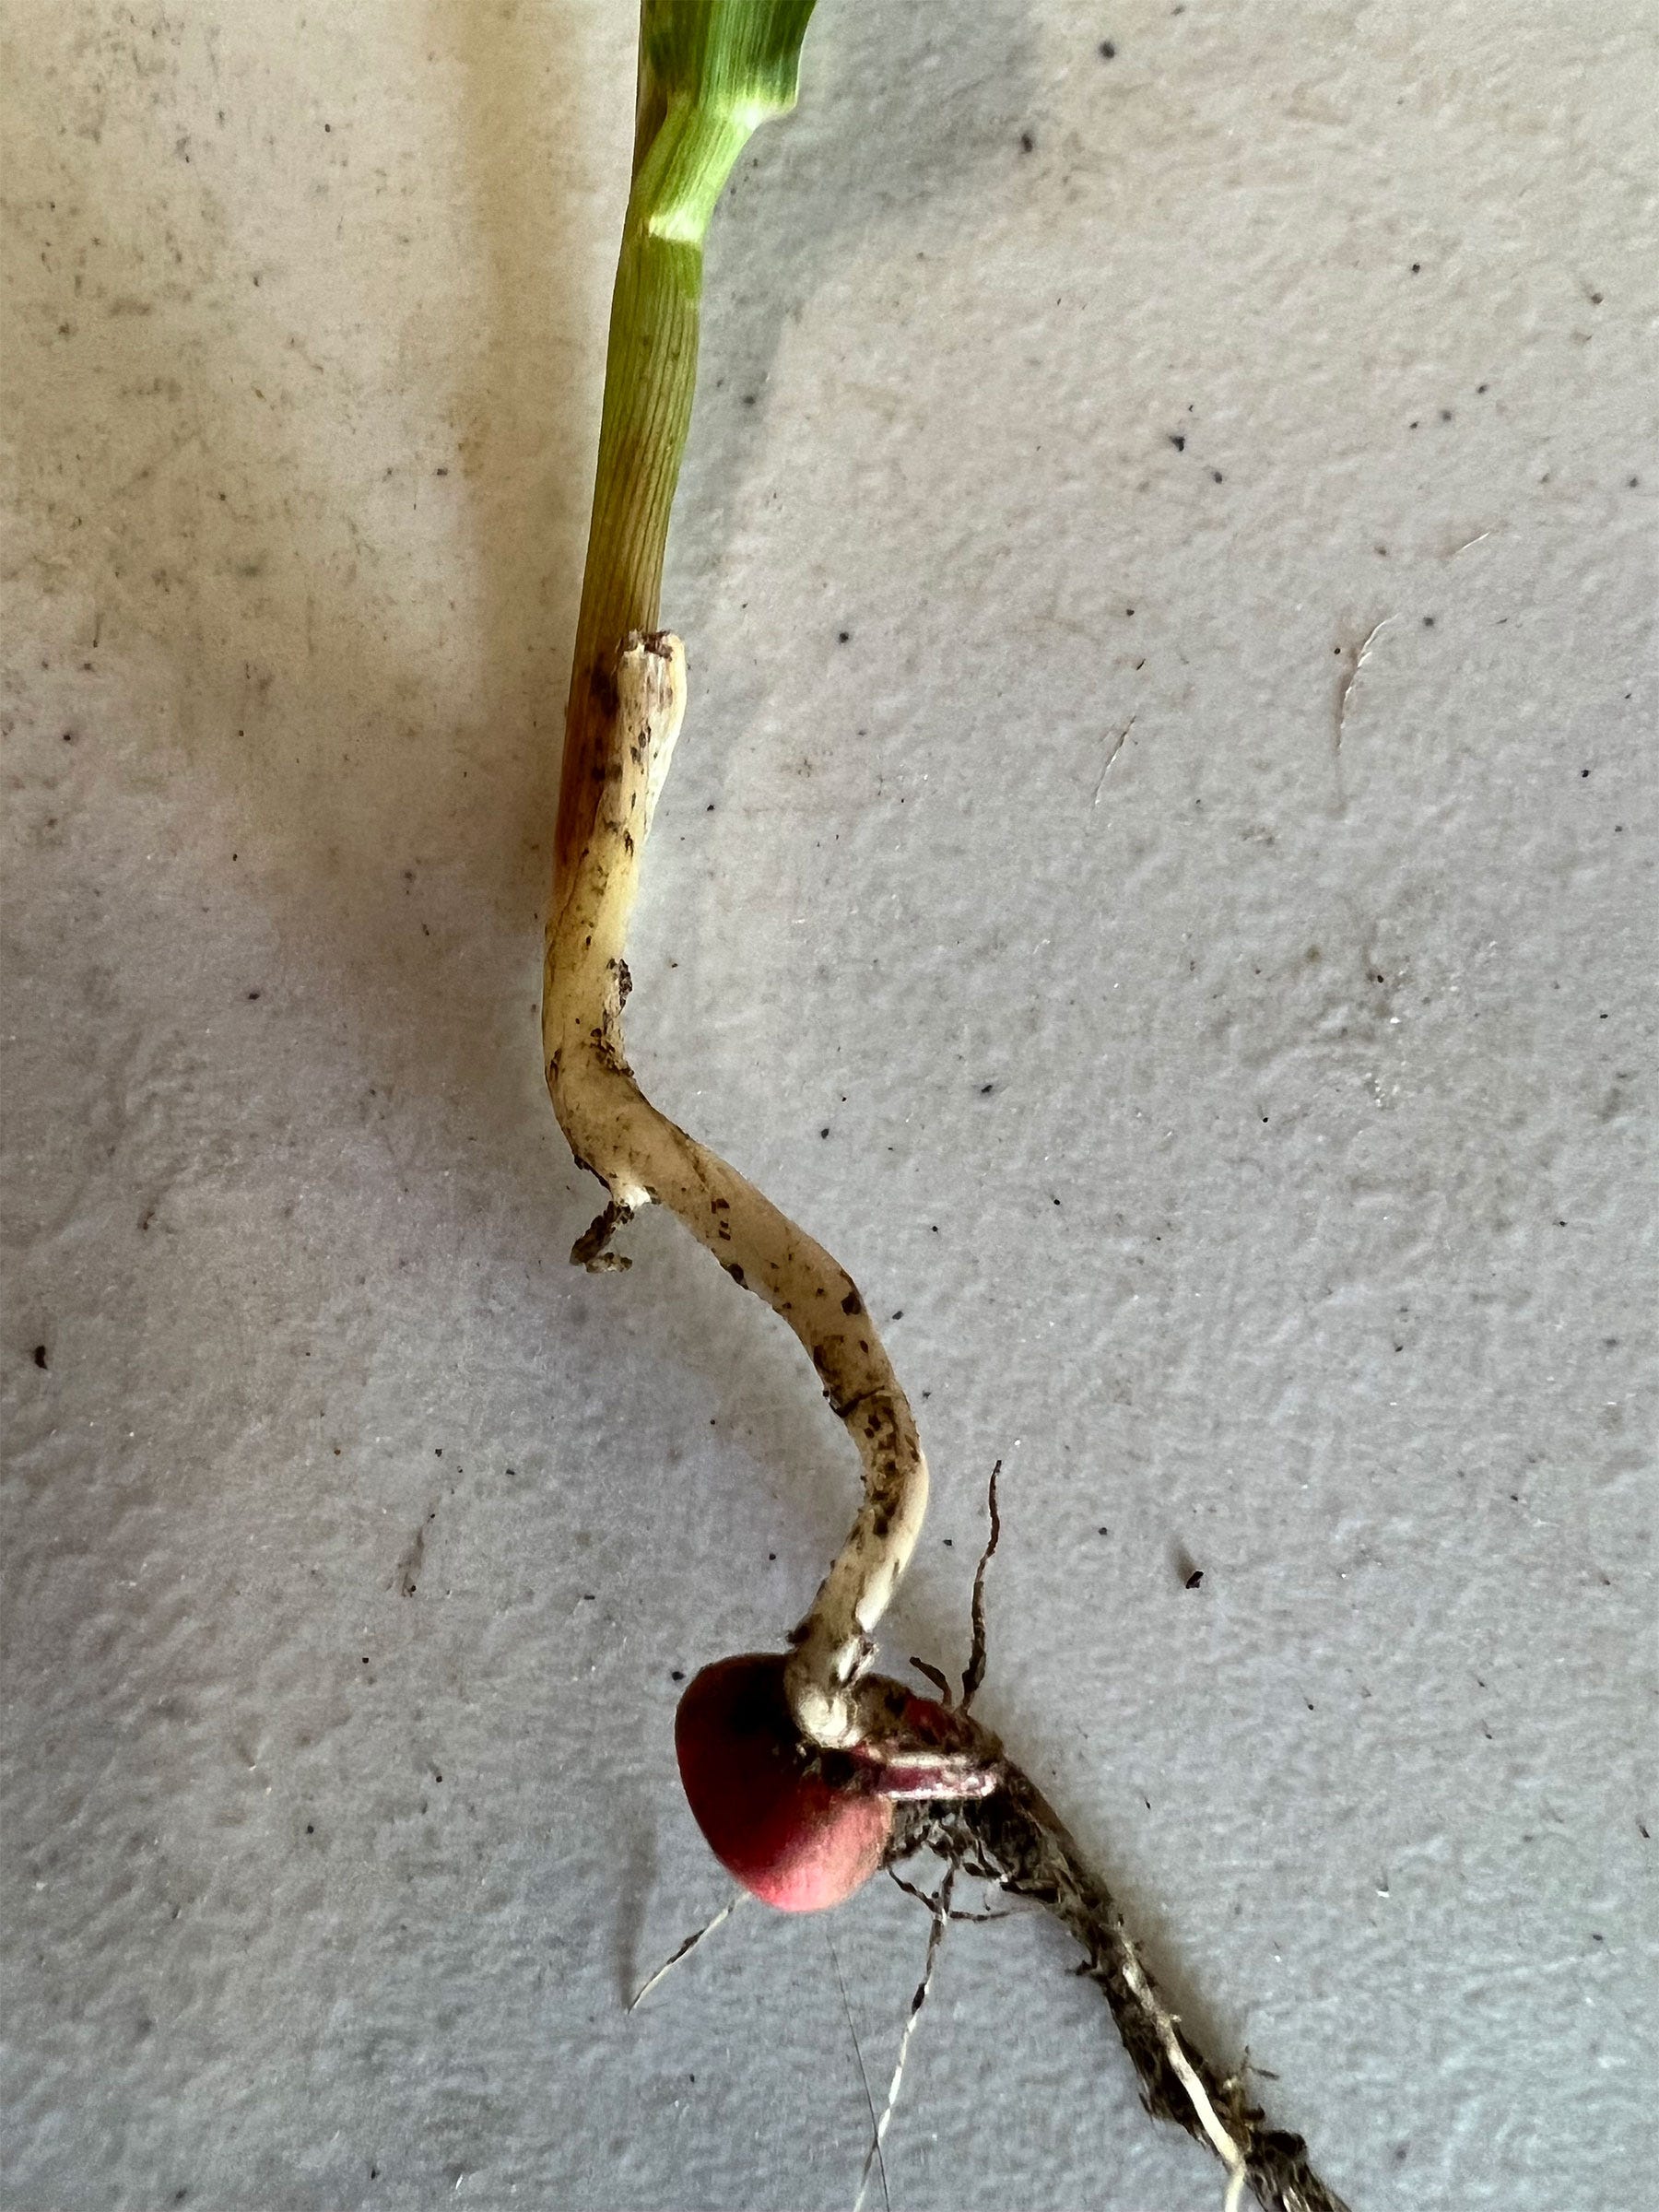 A corn seedling with a twisted mesocotyl